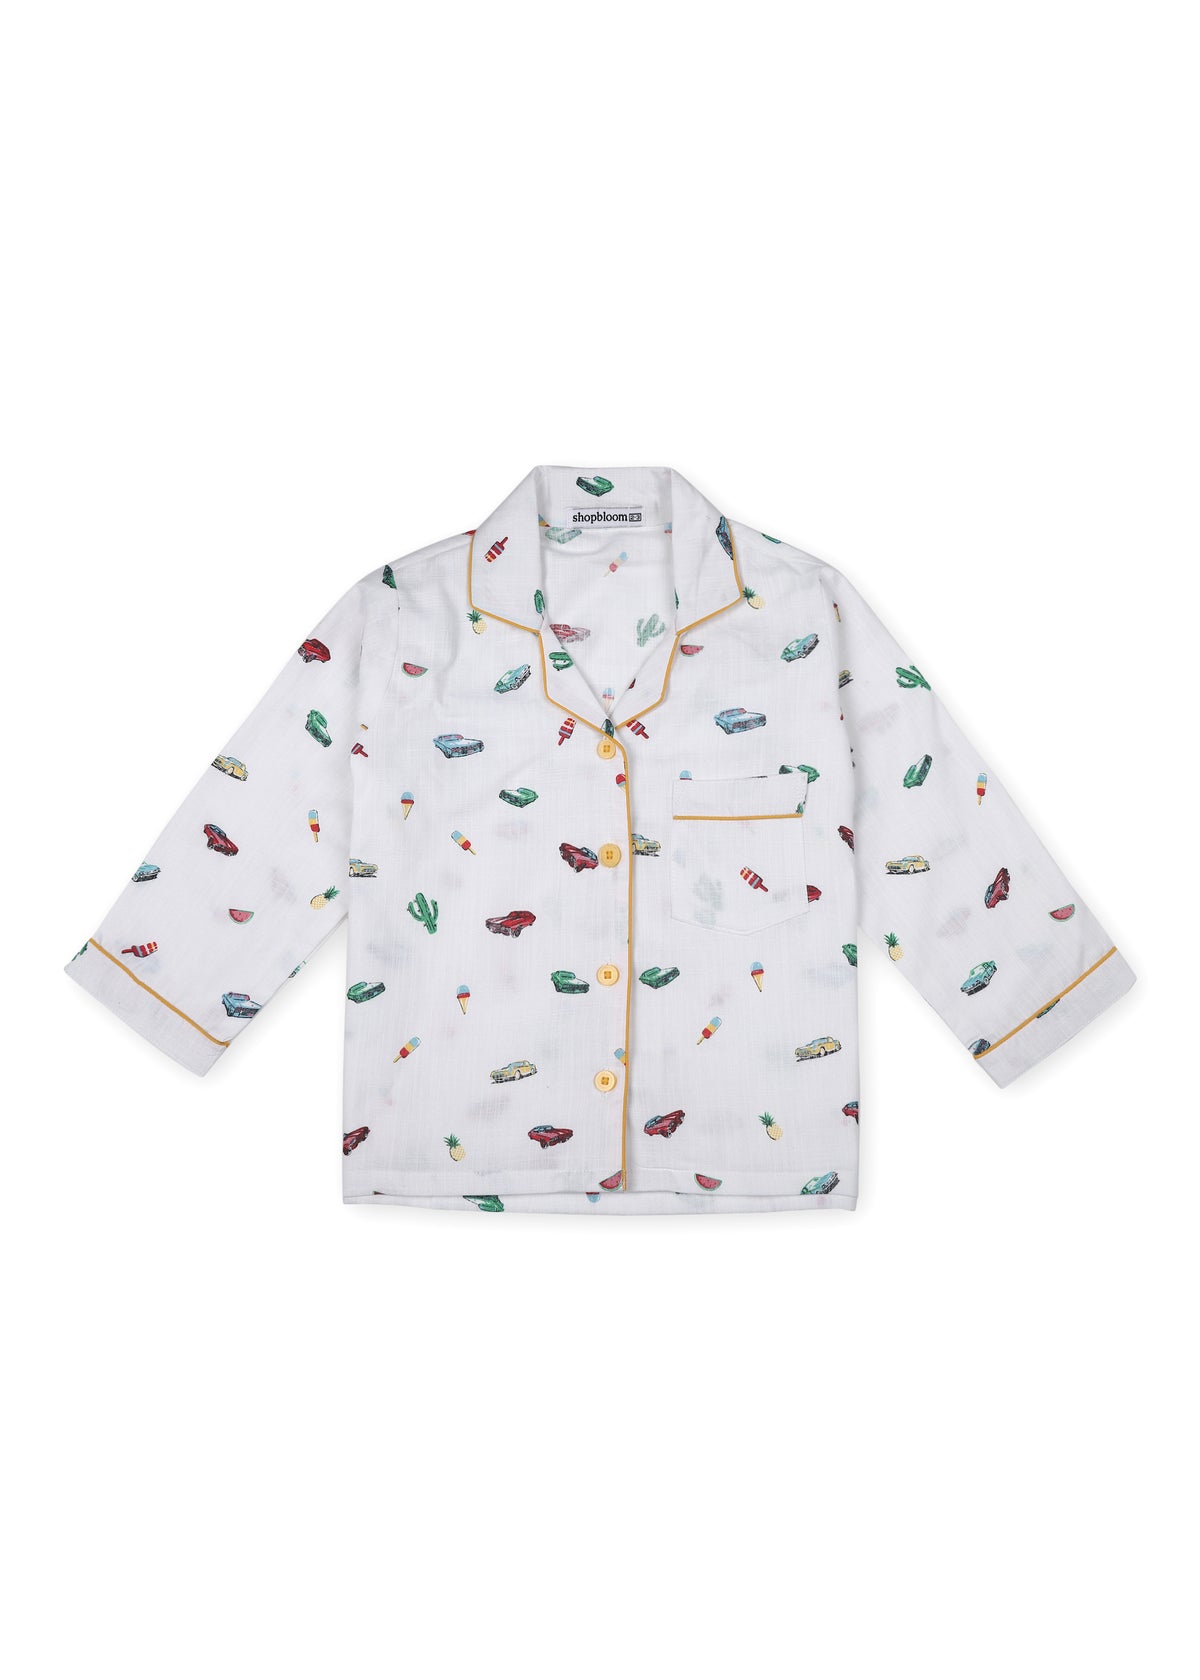 Car and Cactus Print Long Sleeve Kid's Night Suit - Shopbloom